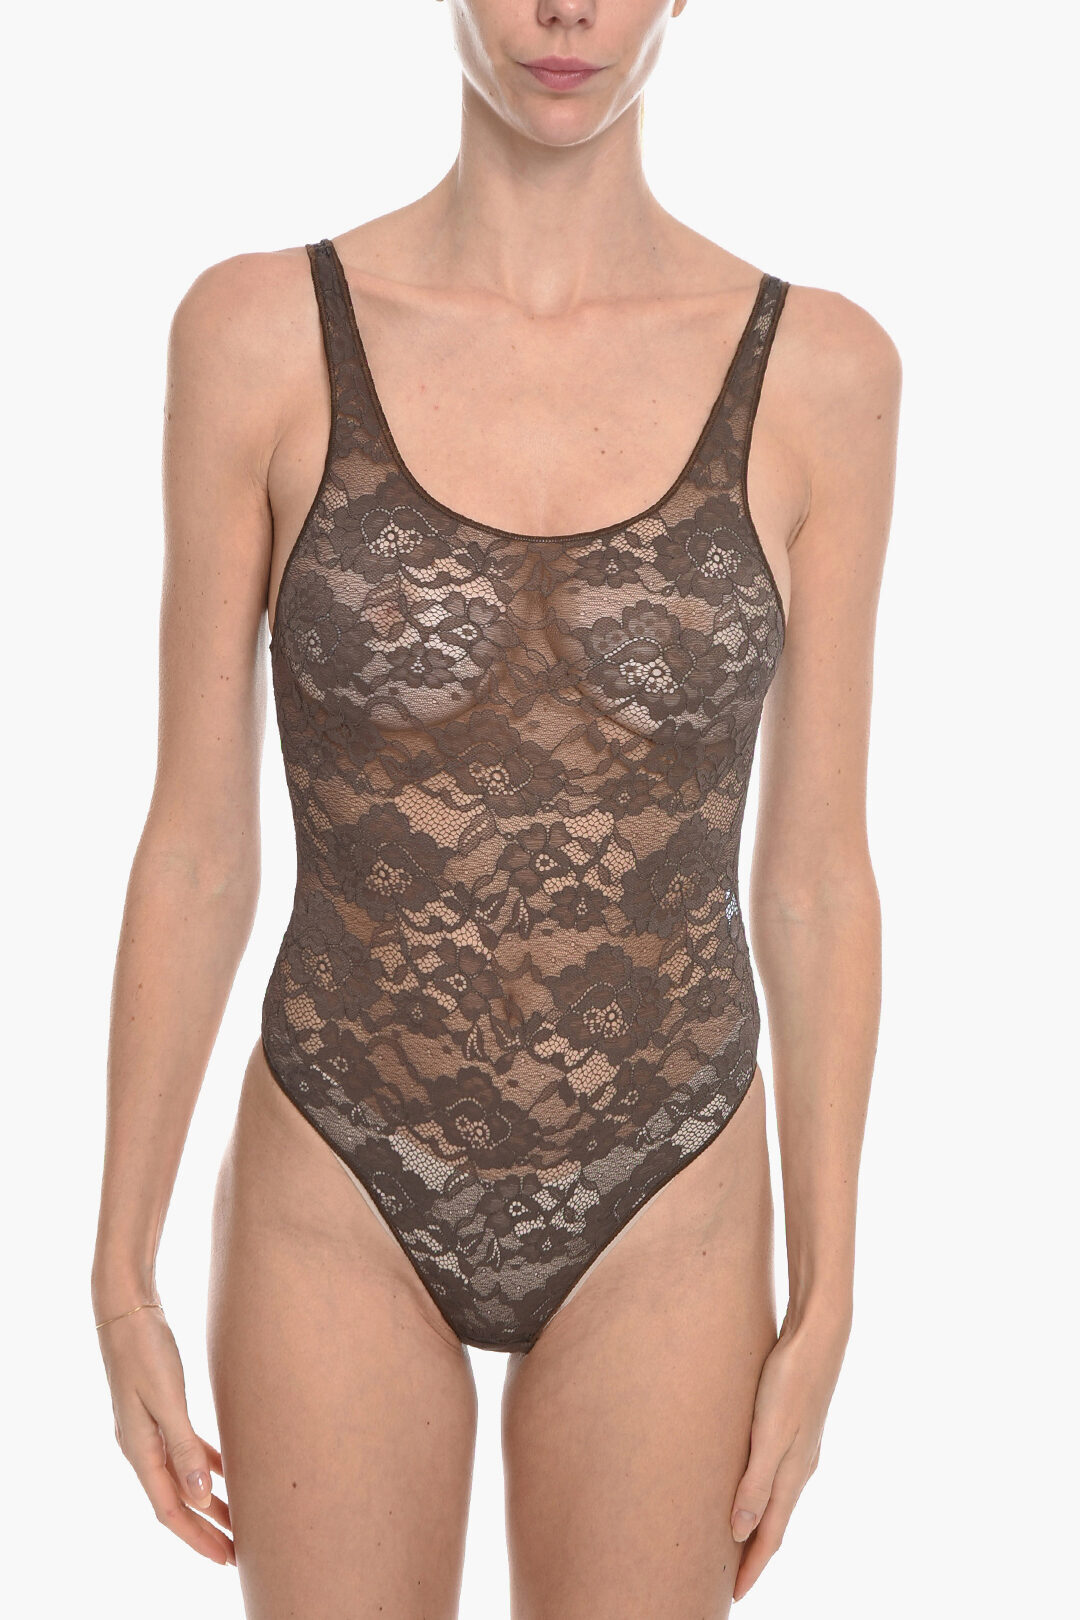 OSEREE オスレー アンダーウェア OPY221 0 BROWN レディース SOLID COLOR LACE BODYSUIT 【関税・送料無料】【ラッピング無料】 dk